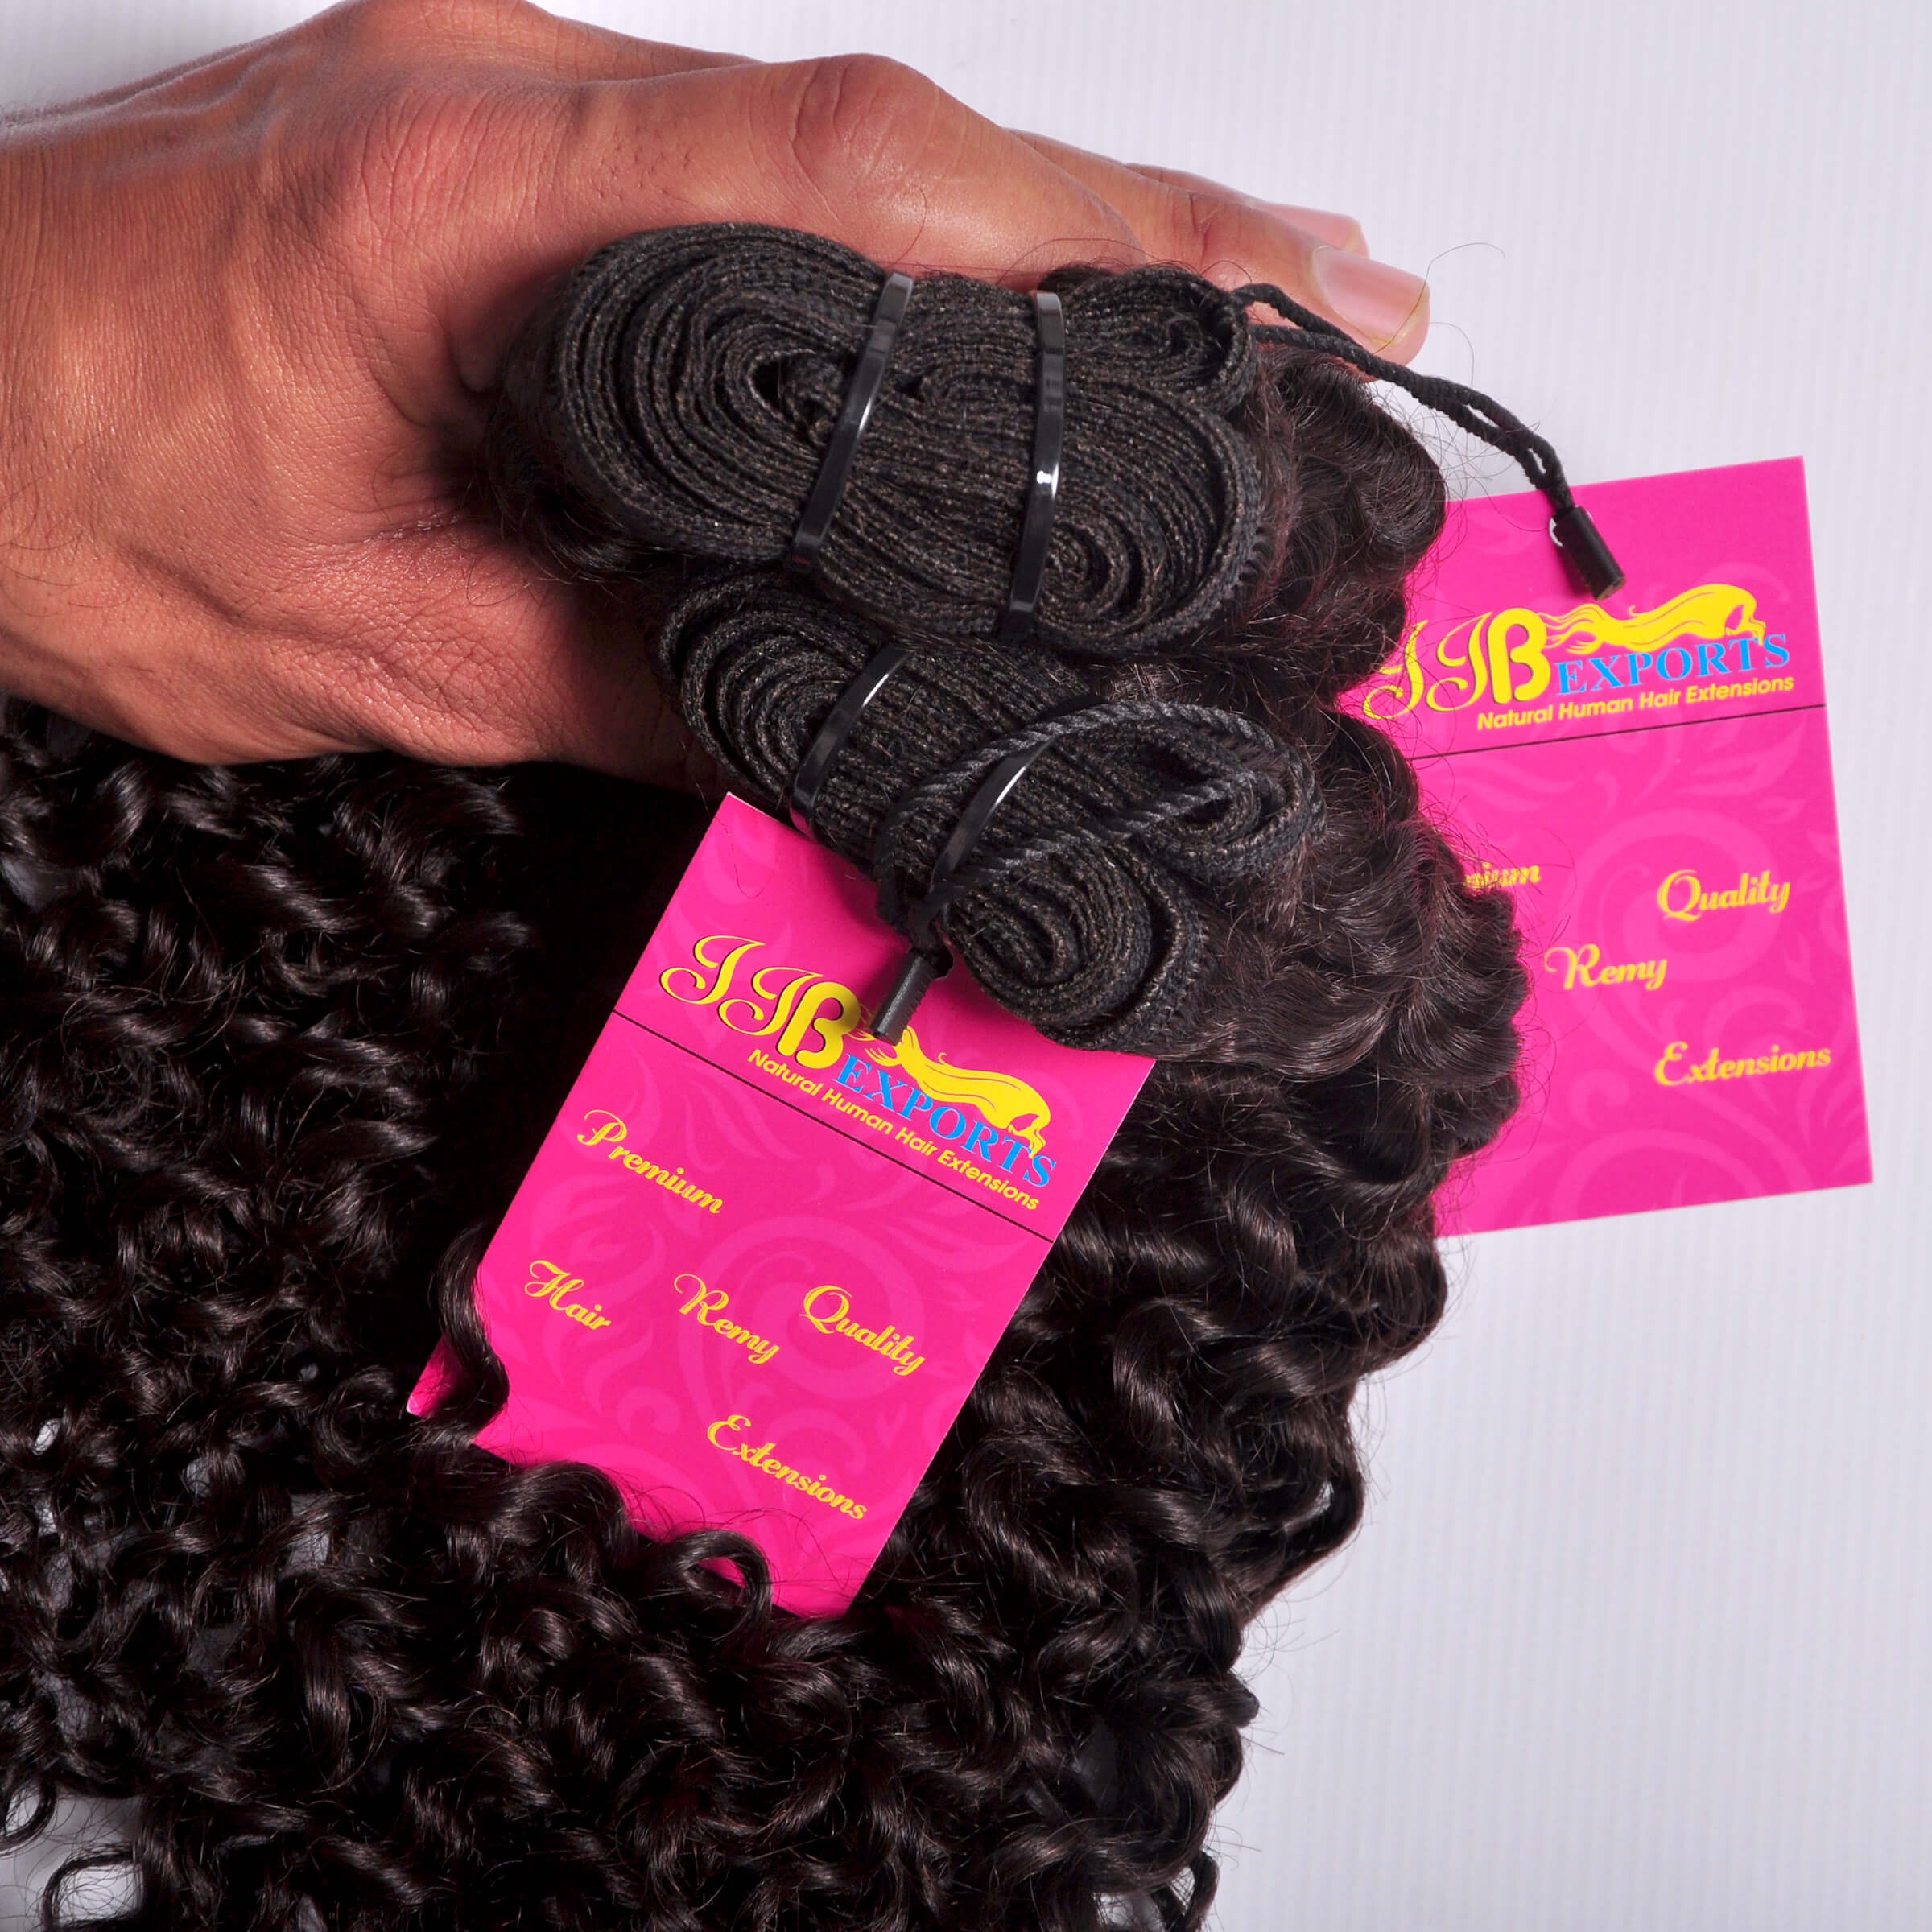 Straight Virgin Indian Soft & Silky Wavy/curly Remy Wefted Human Hair Bundle vendor